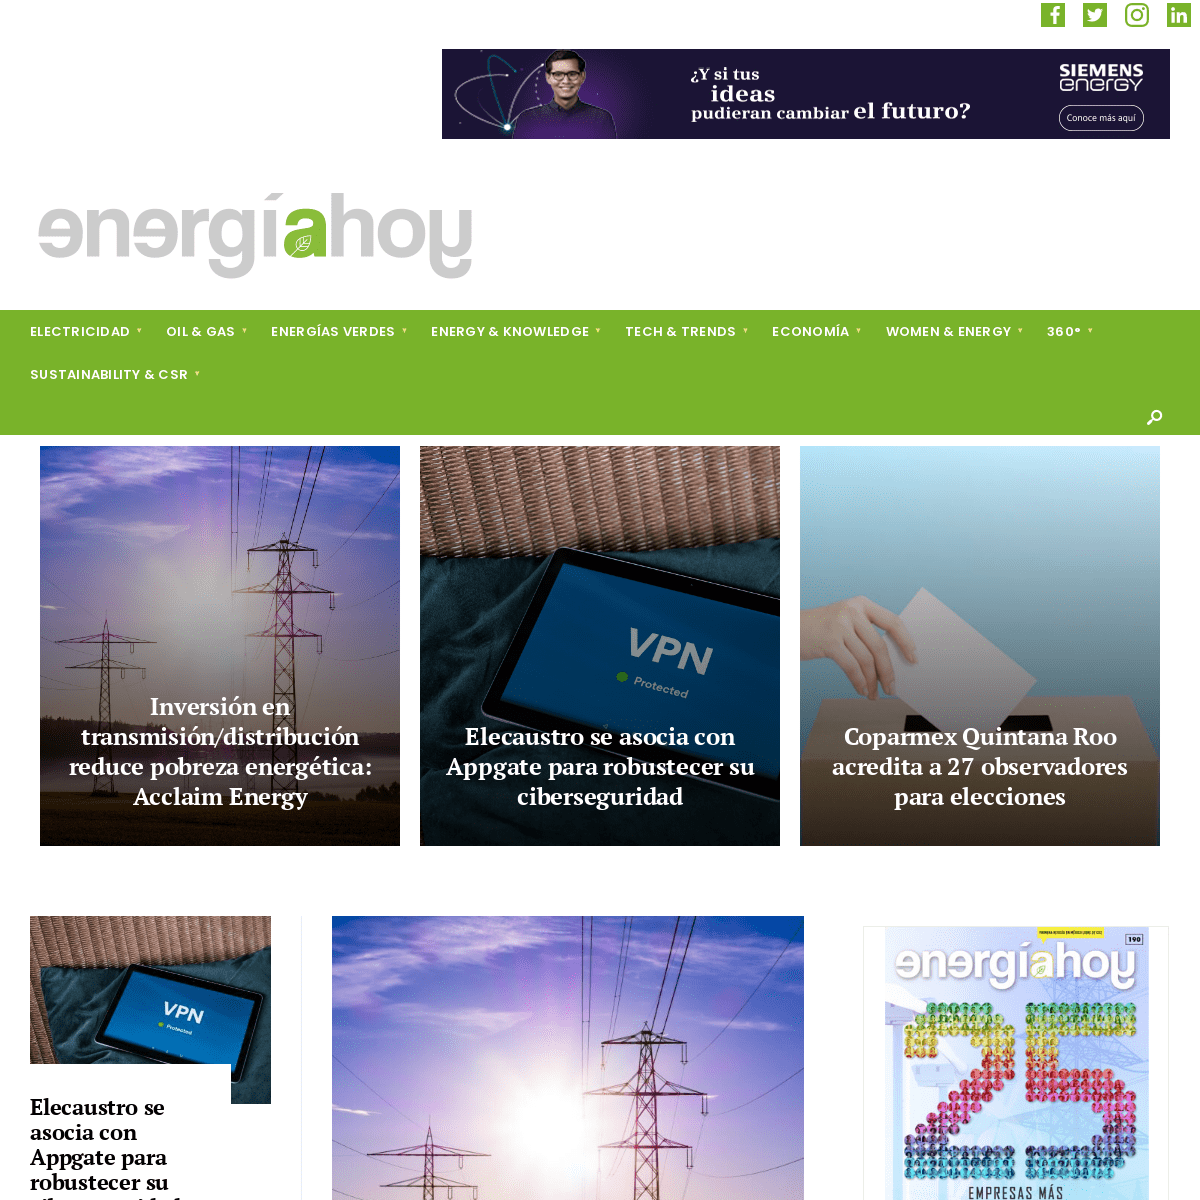 A complete backup of https://energiahoy.com